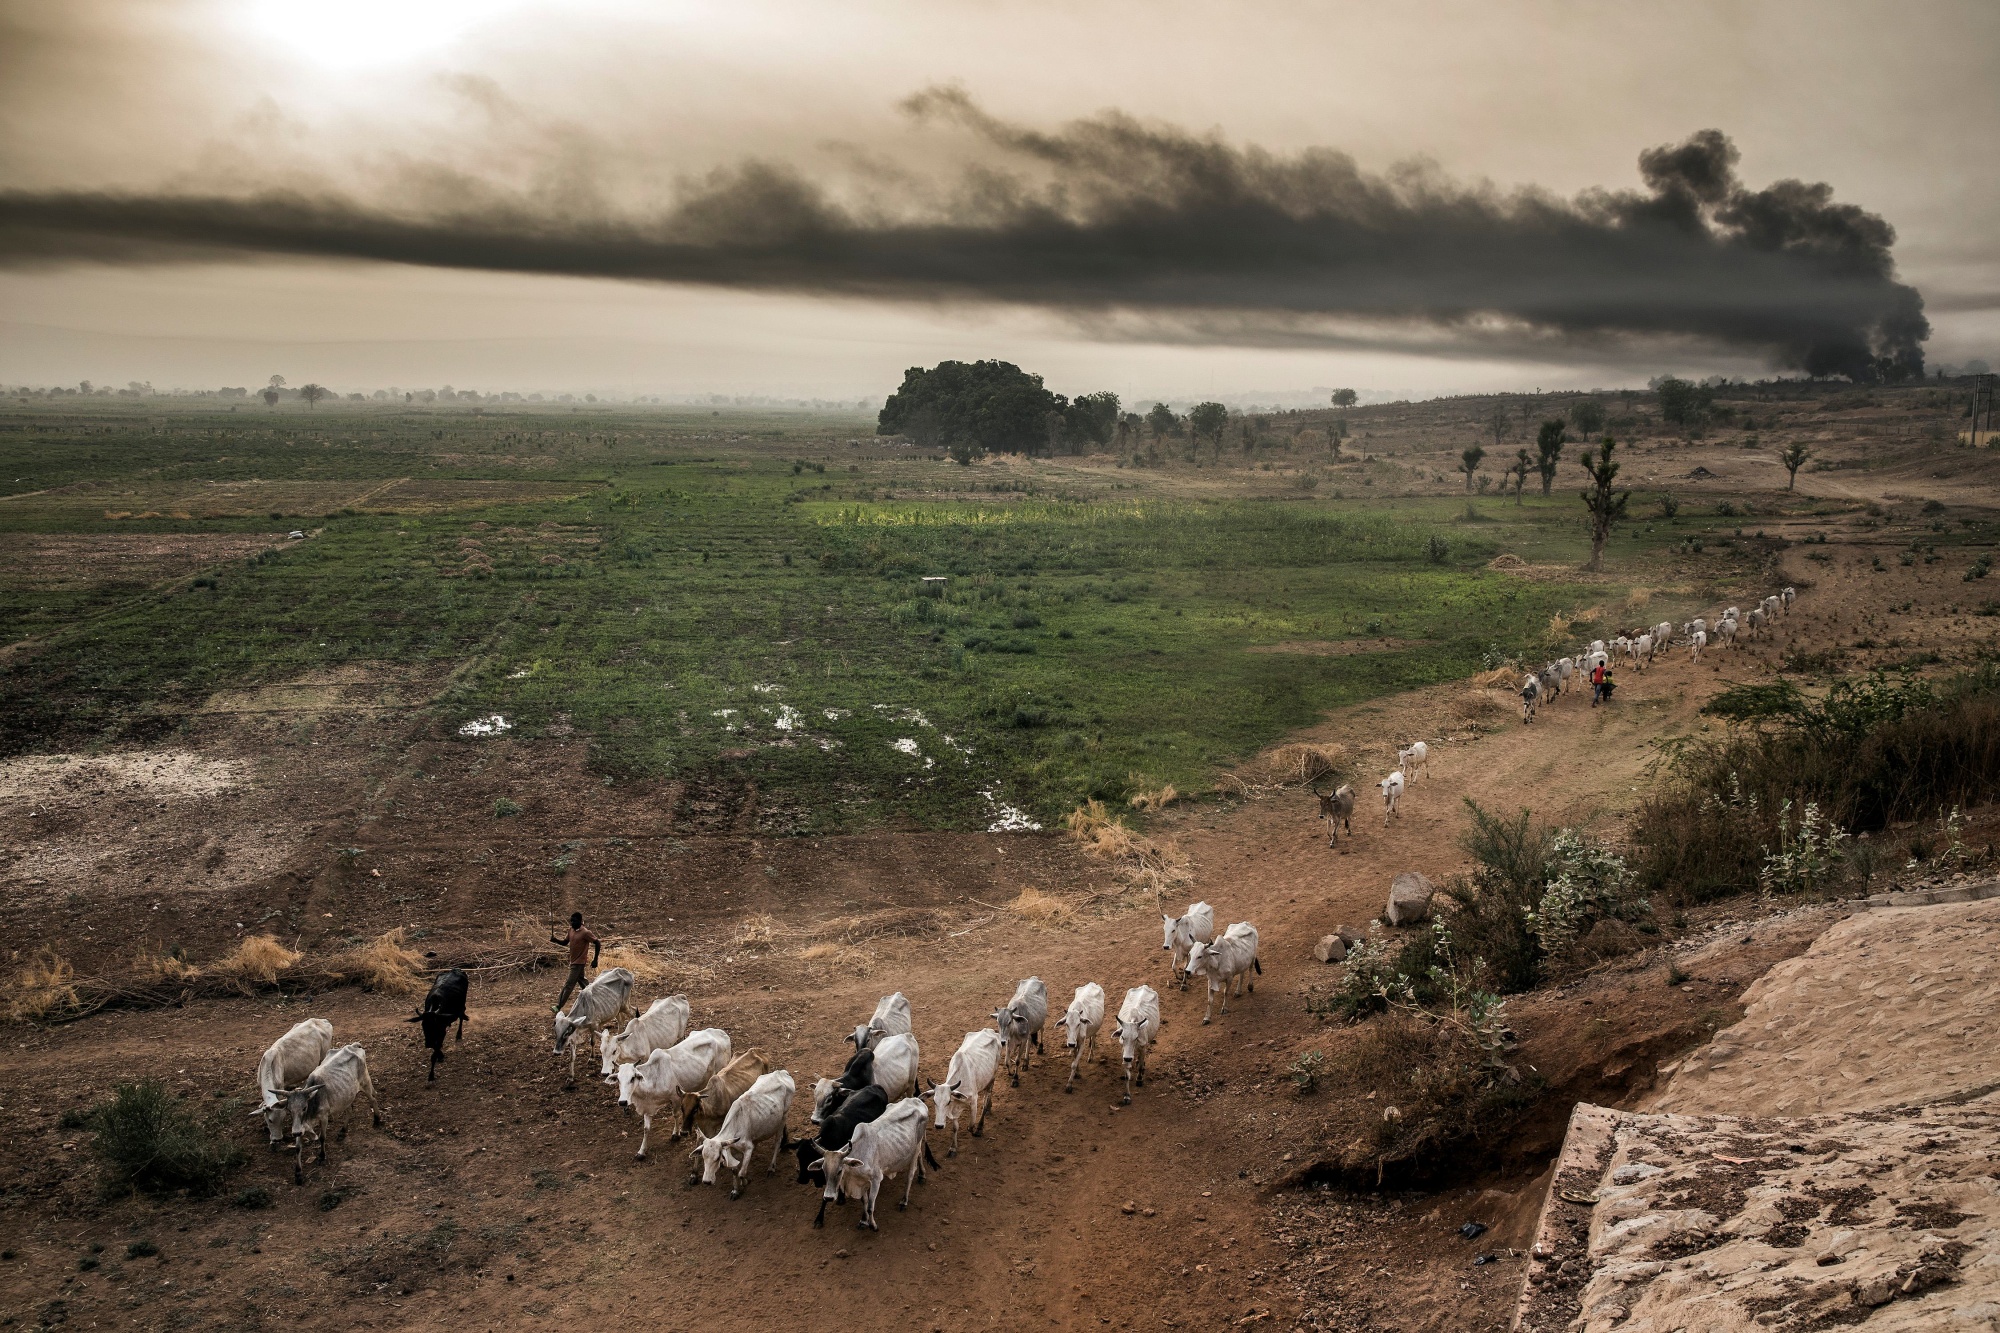 Farmers herd their cattle at a farm on the outskirts of Sokoto, northern Nigeria. Agriculture workers in the region are dealing with violent organized crime gangs seeking to extort money from farmers.